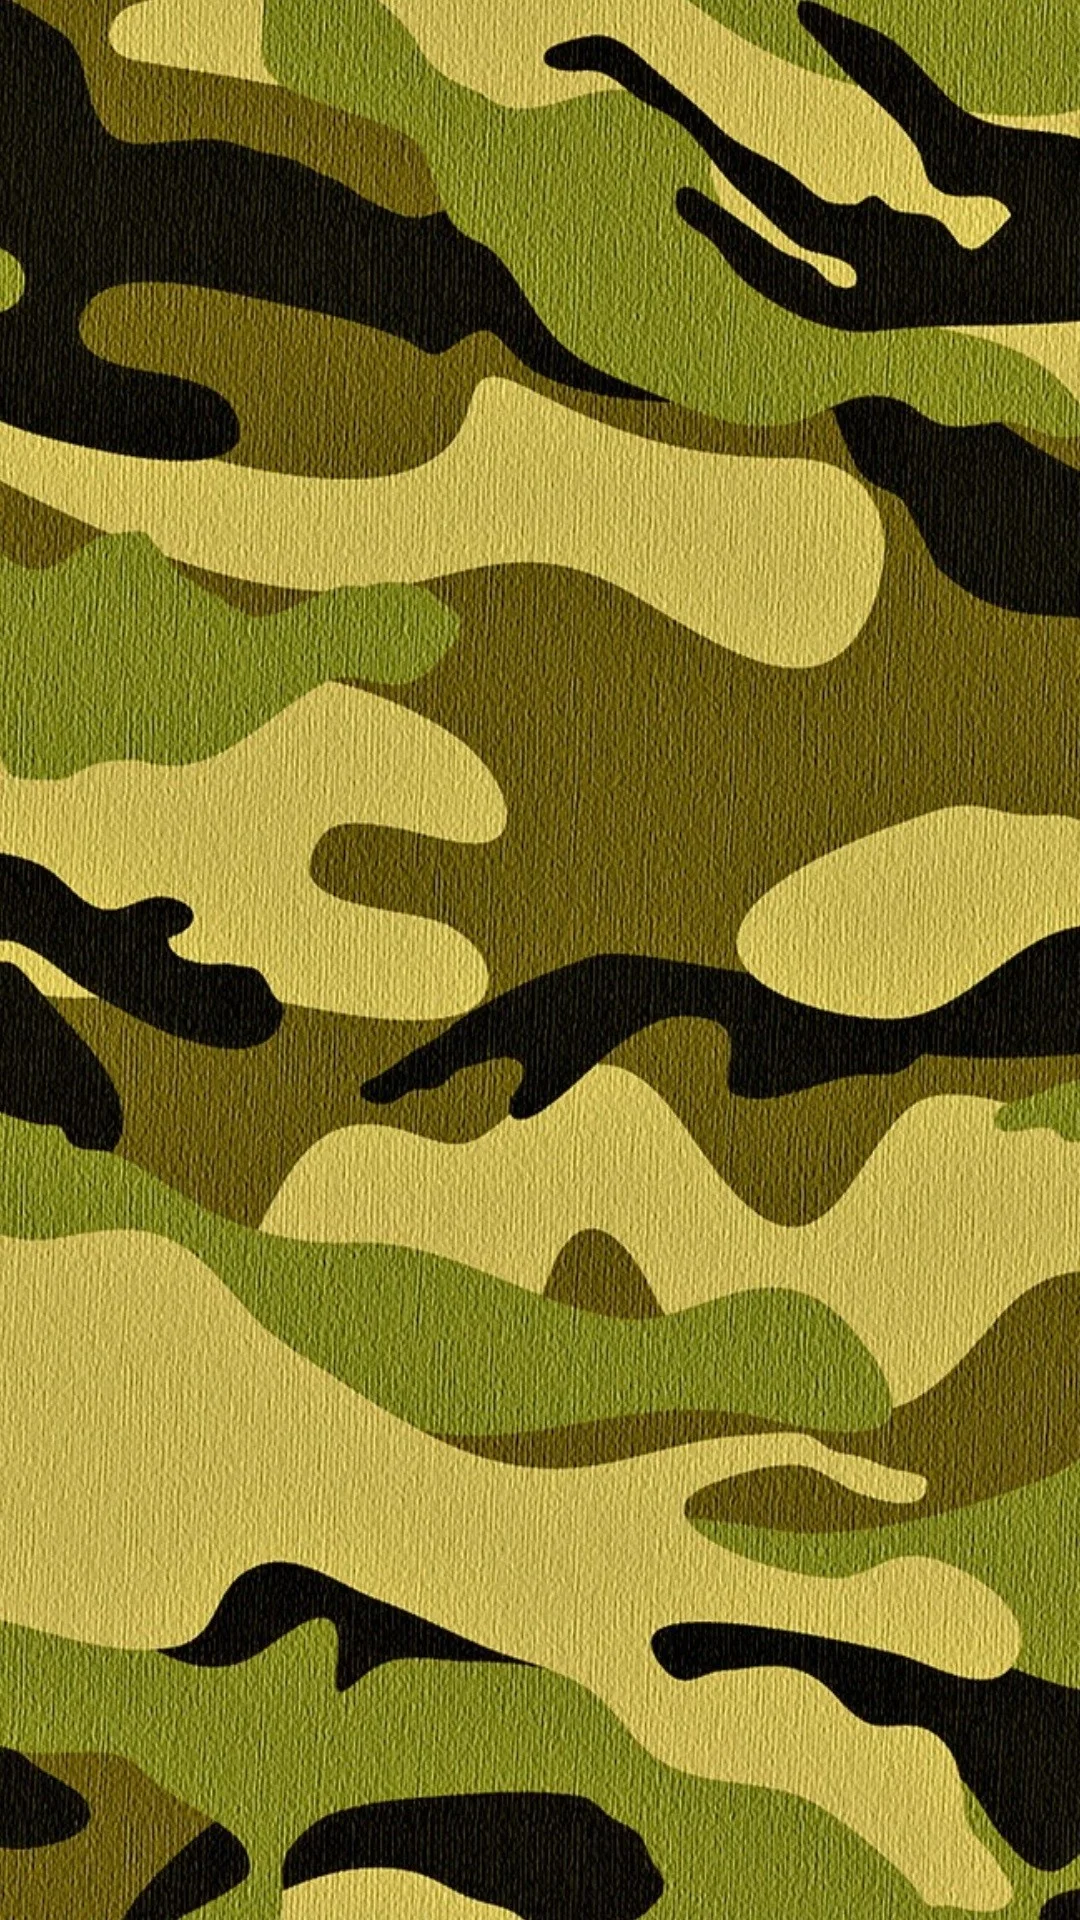 Camouflage wallpaper for iPhone or Android. Tags: camo, hunting, army,  backgrounds